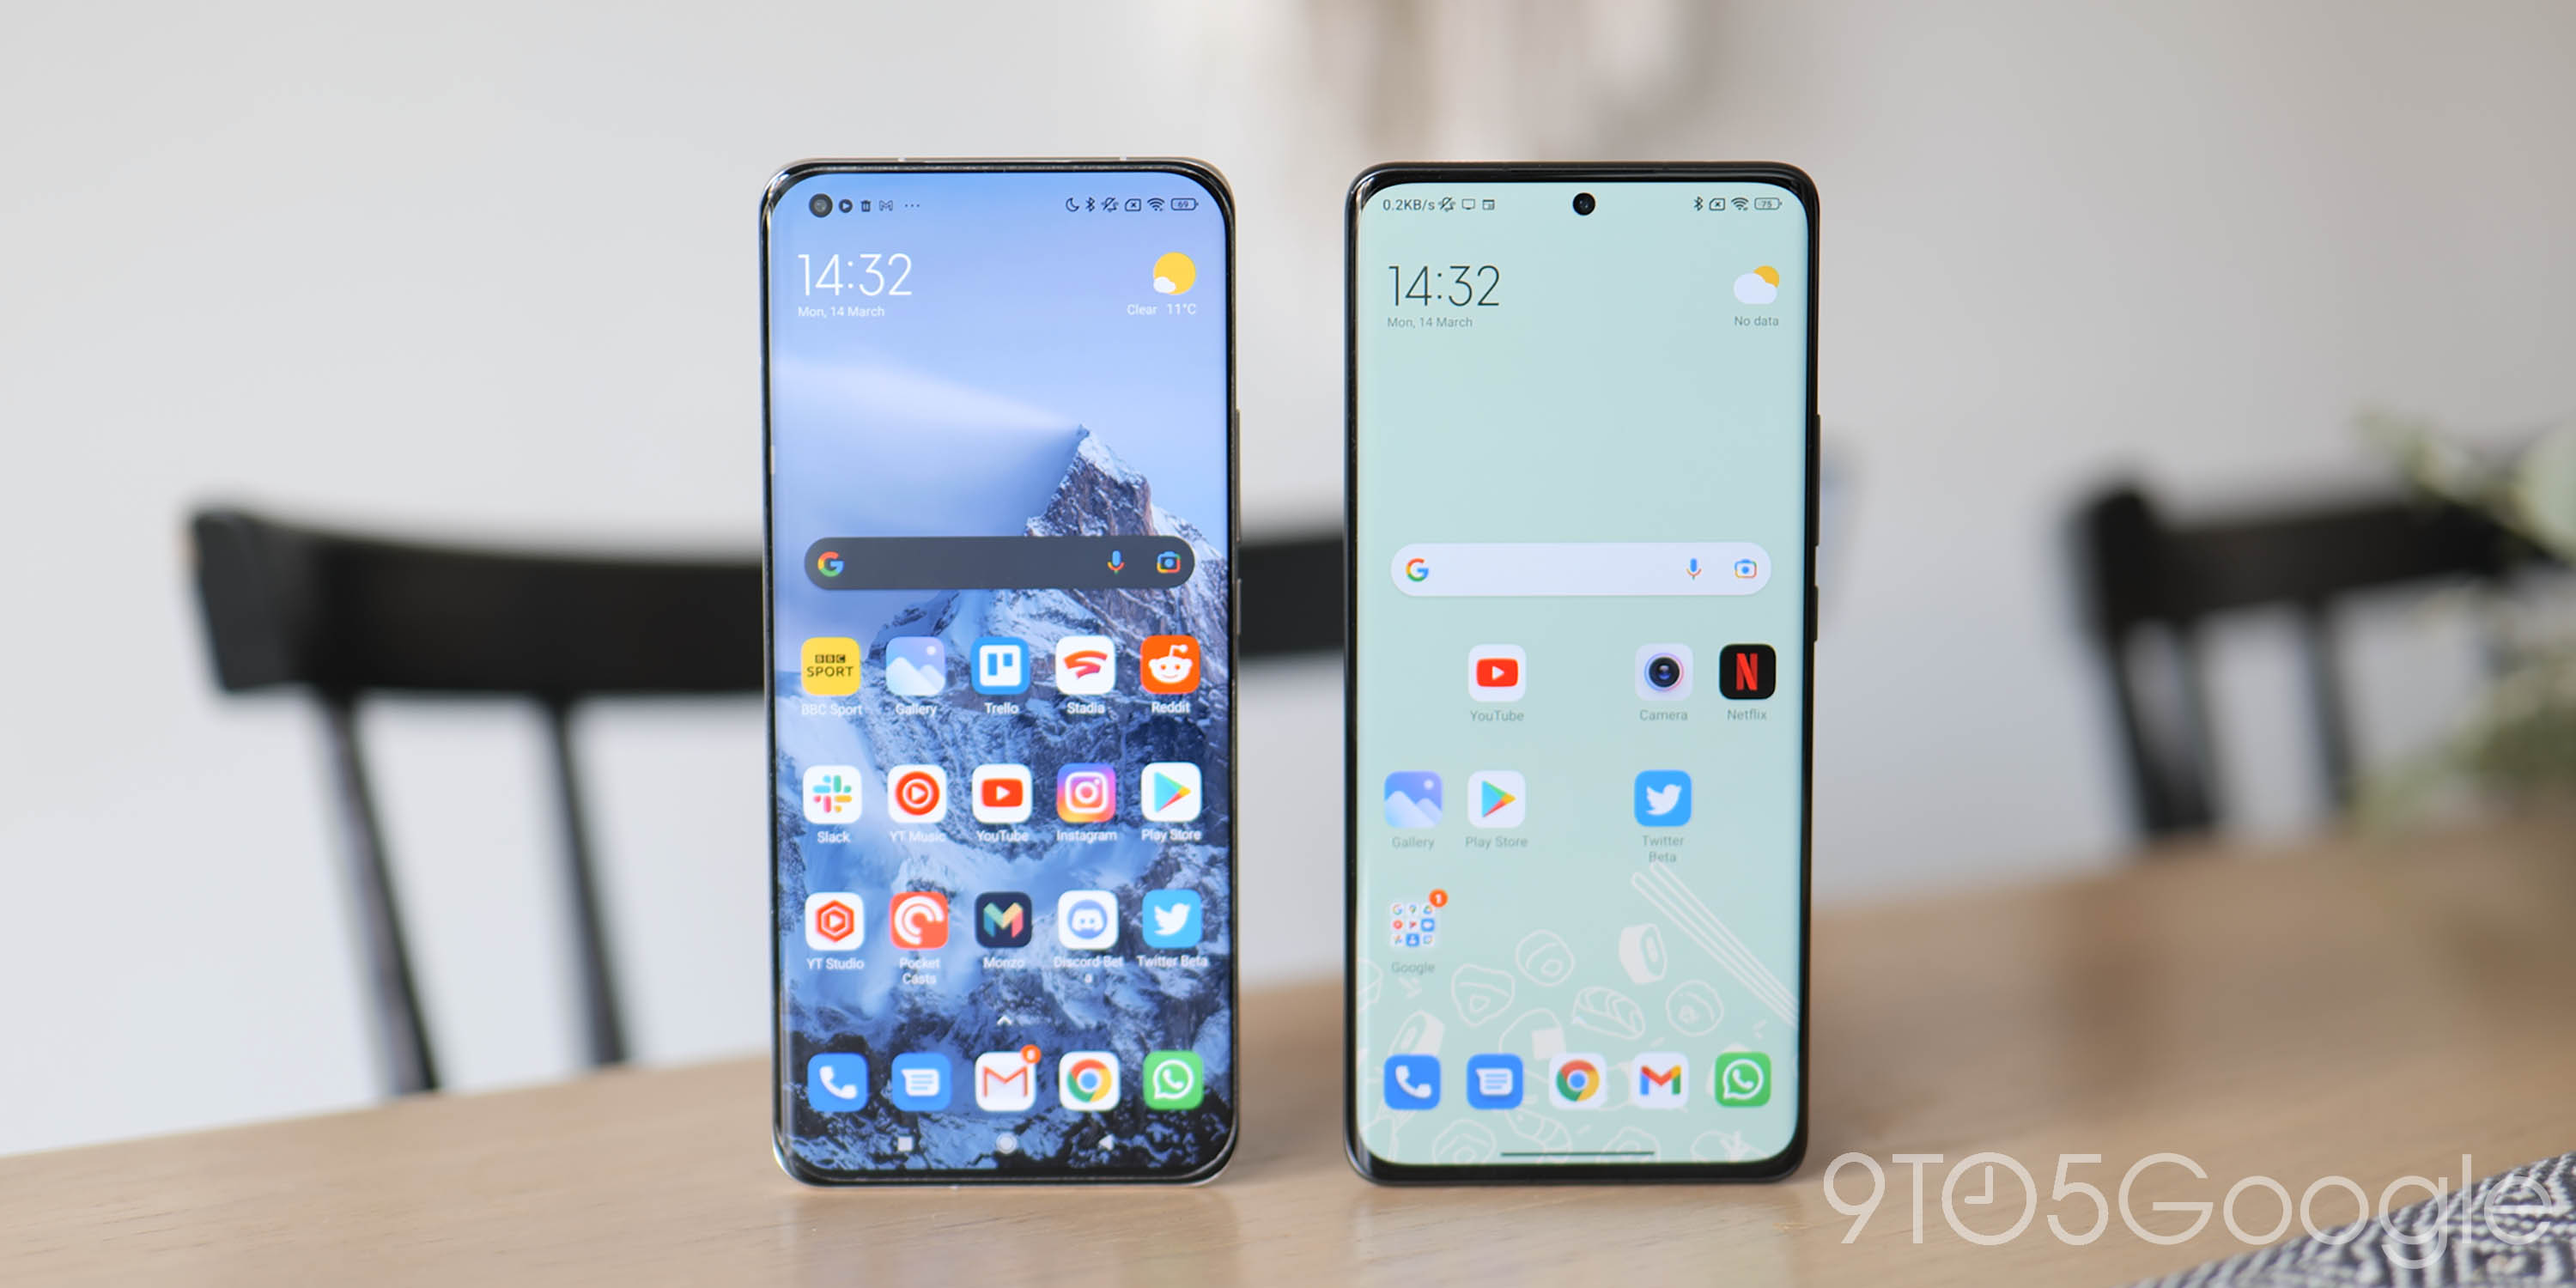 Xiaomi 12 Pro and Mi 11 Ultra displays side-by-side